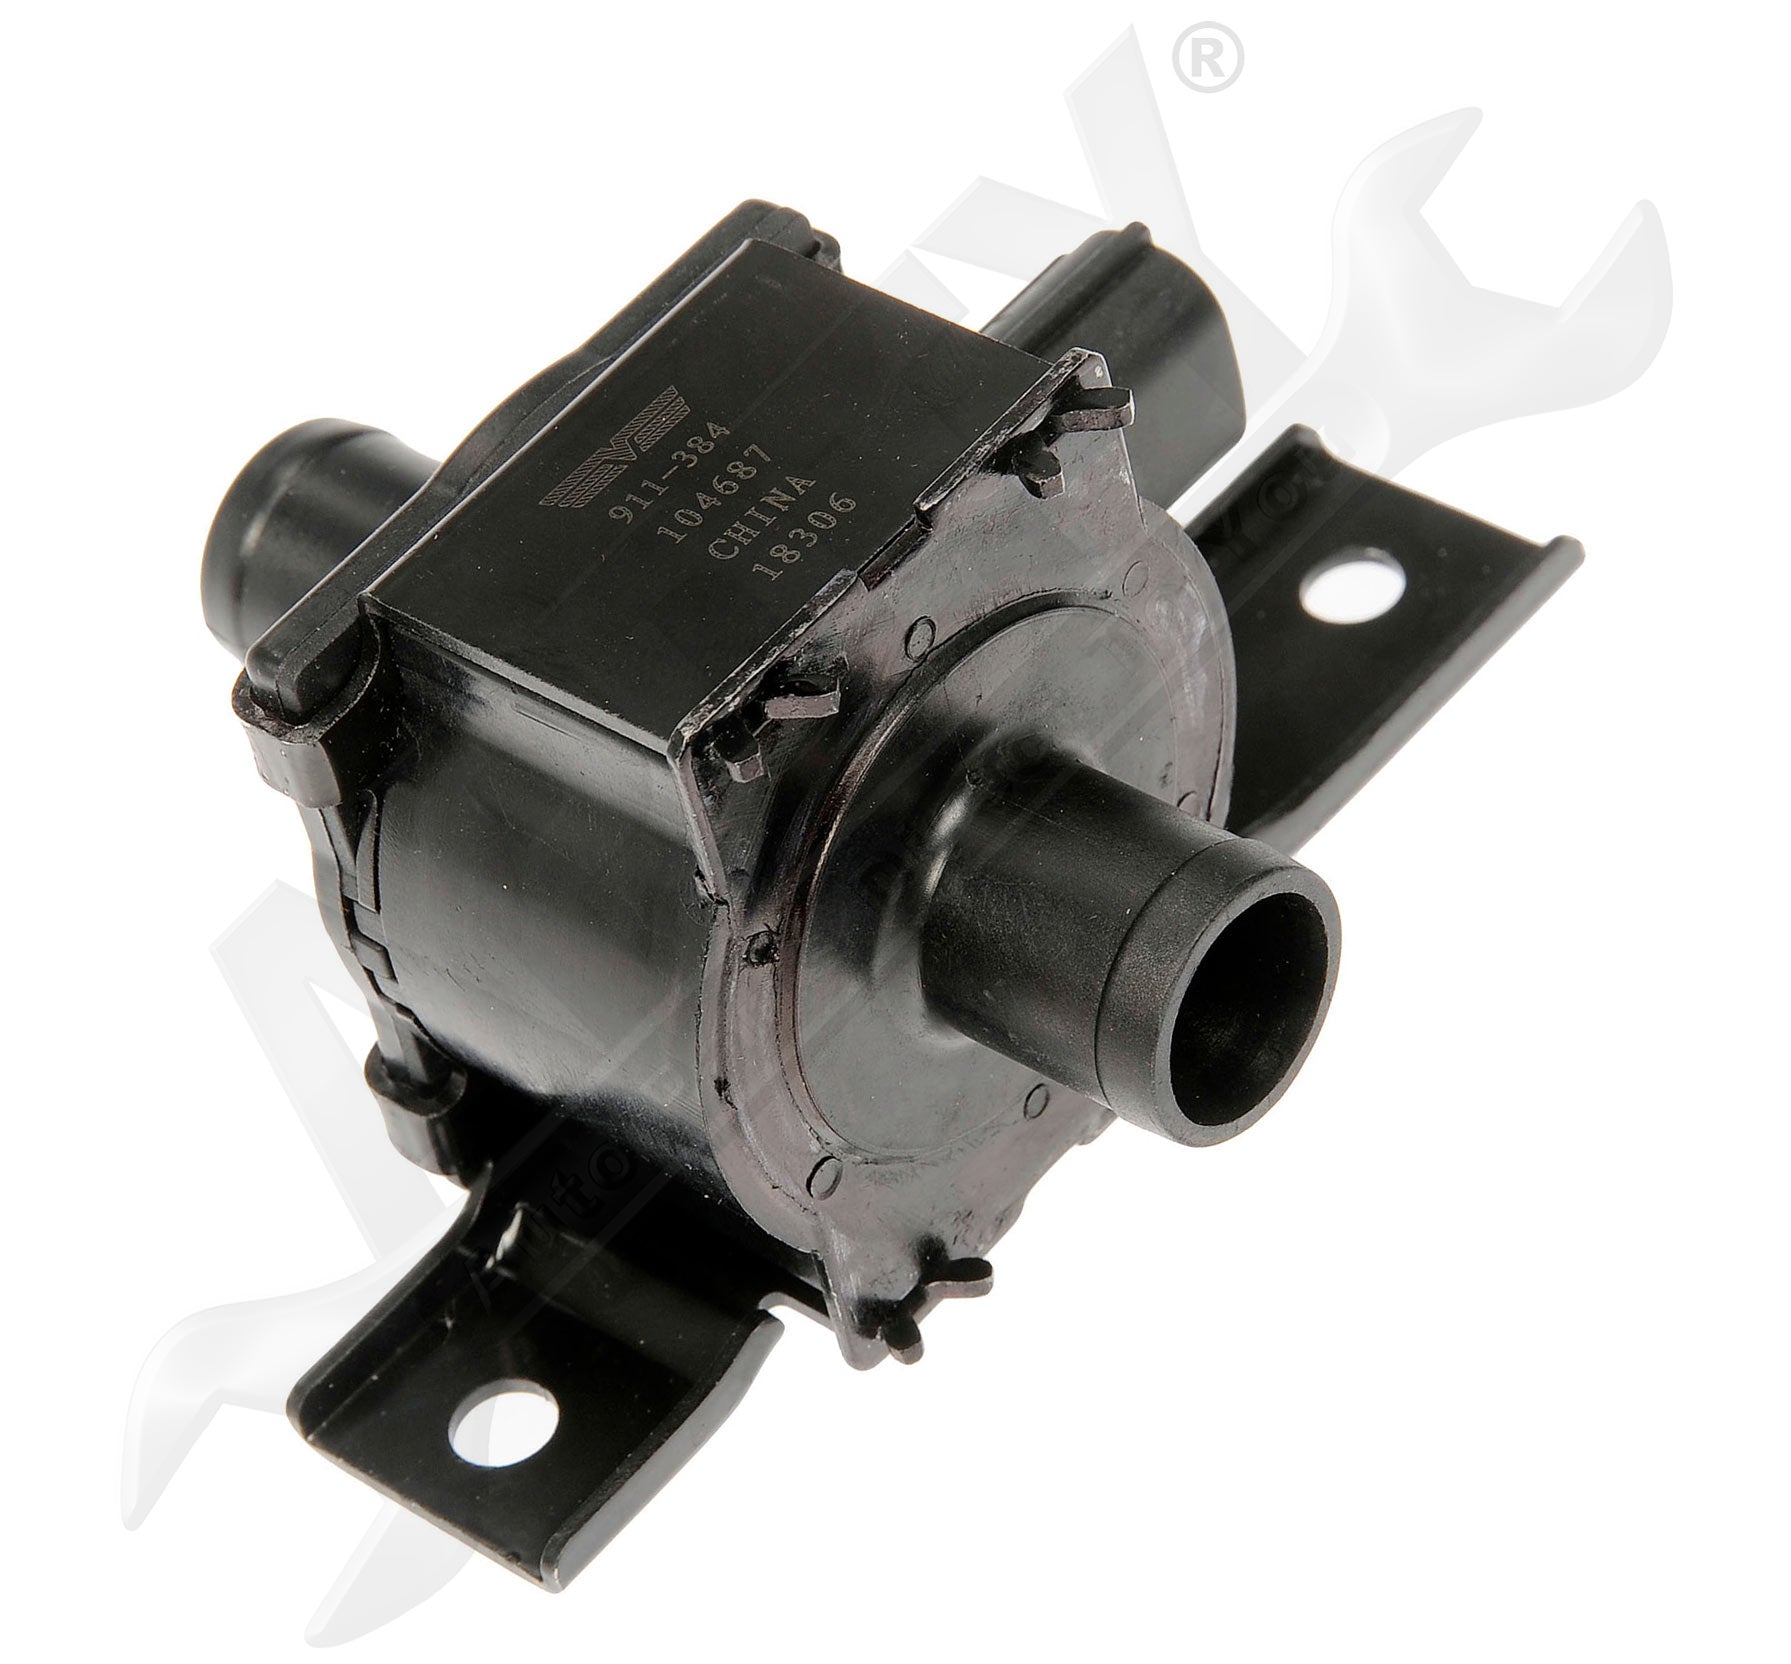 APDTY, APDTY 142694 Evaporative Emissions Canister Vent Solenoid Valve